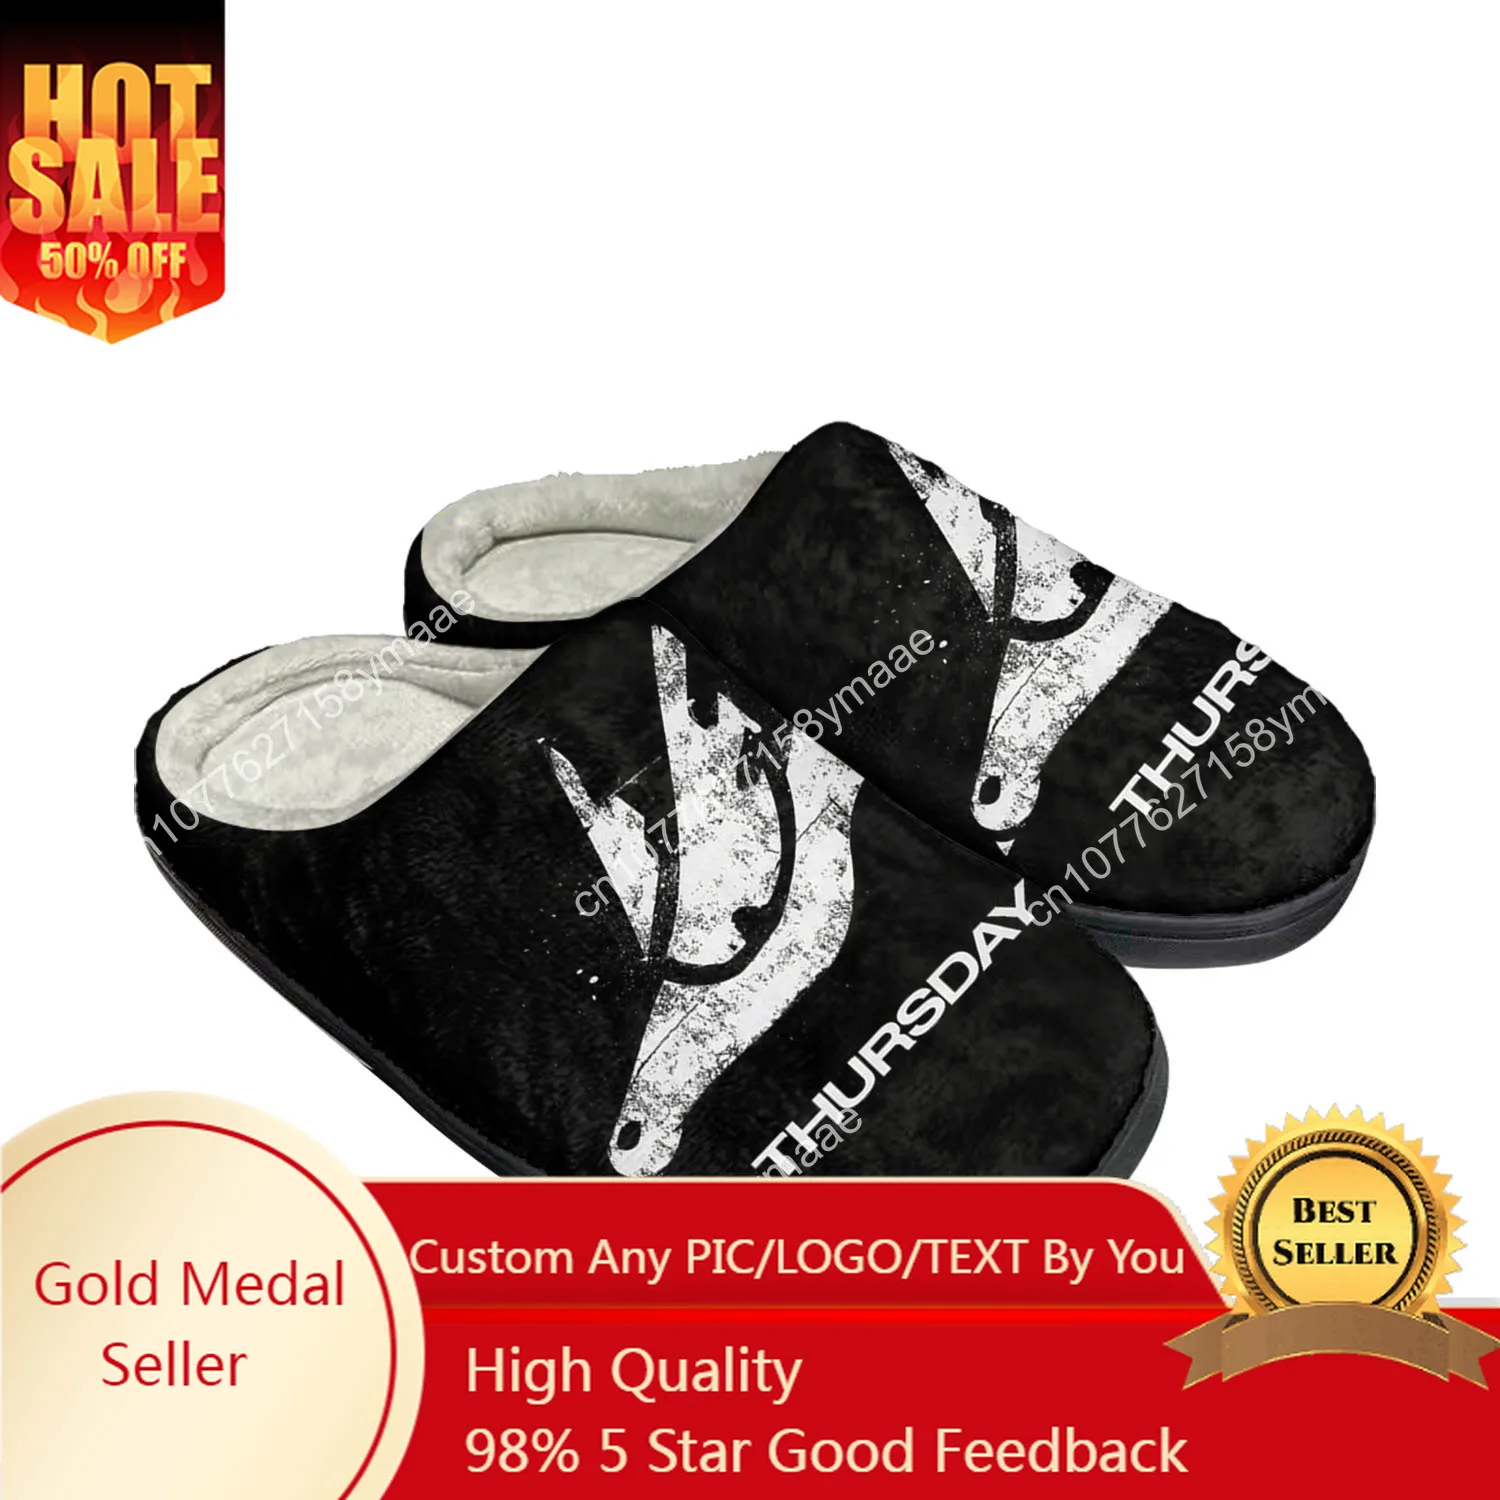 Thursday Band Home Cotton Slippers Mens Womens Plush Bedroom Casual Keep Warm Shoes Thermal Indoor Slipper Customized Shoe